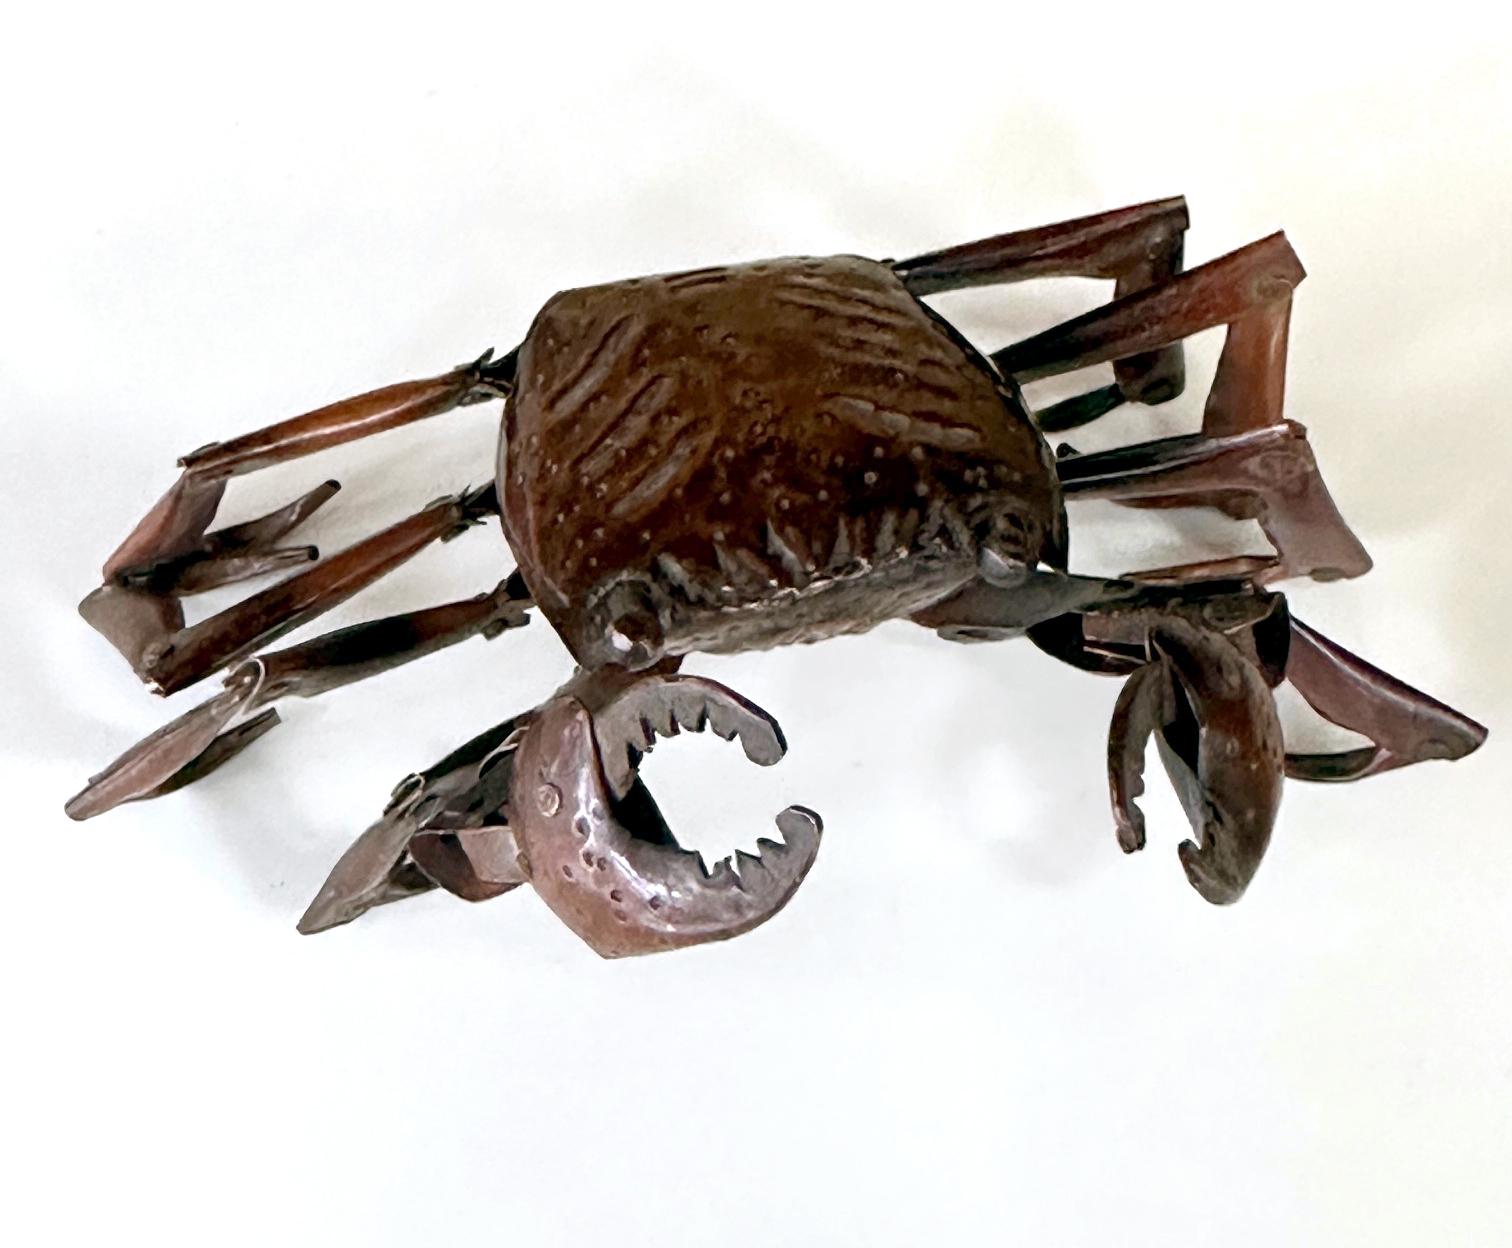 A small copper crab with articulated legs made by Myochin Hiroyoshi in the late Meiji Period circa 1890-1900s. As an ornamental display item, this type of small sculpture with moving parts is known in Japanese as Jizai Okimono. The crab was